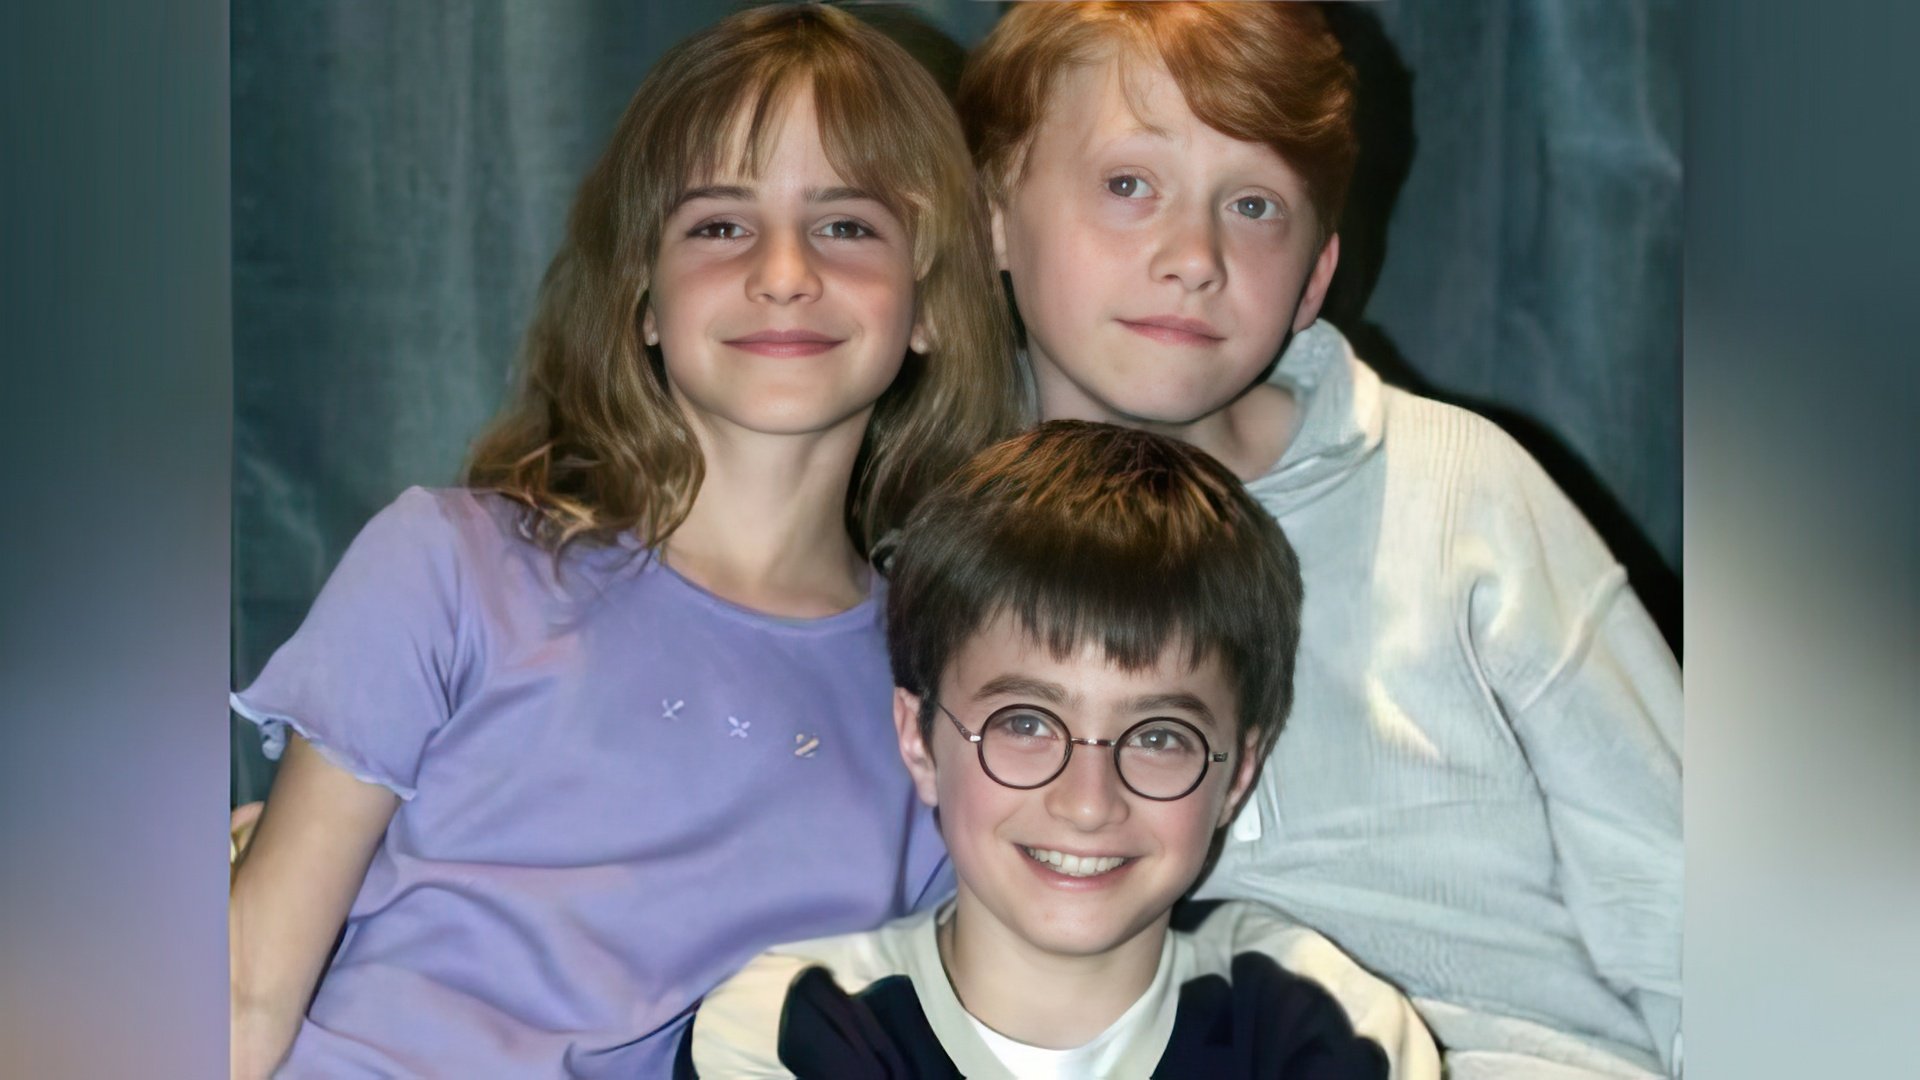 A trio of young wizards - Harry, Ron and Hermione